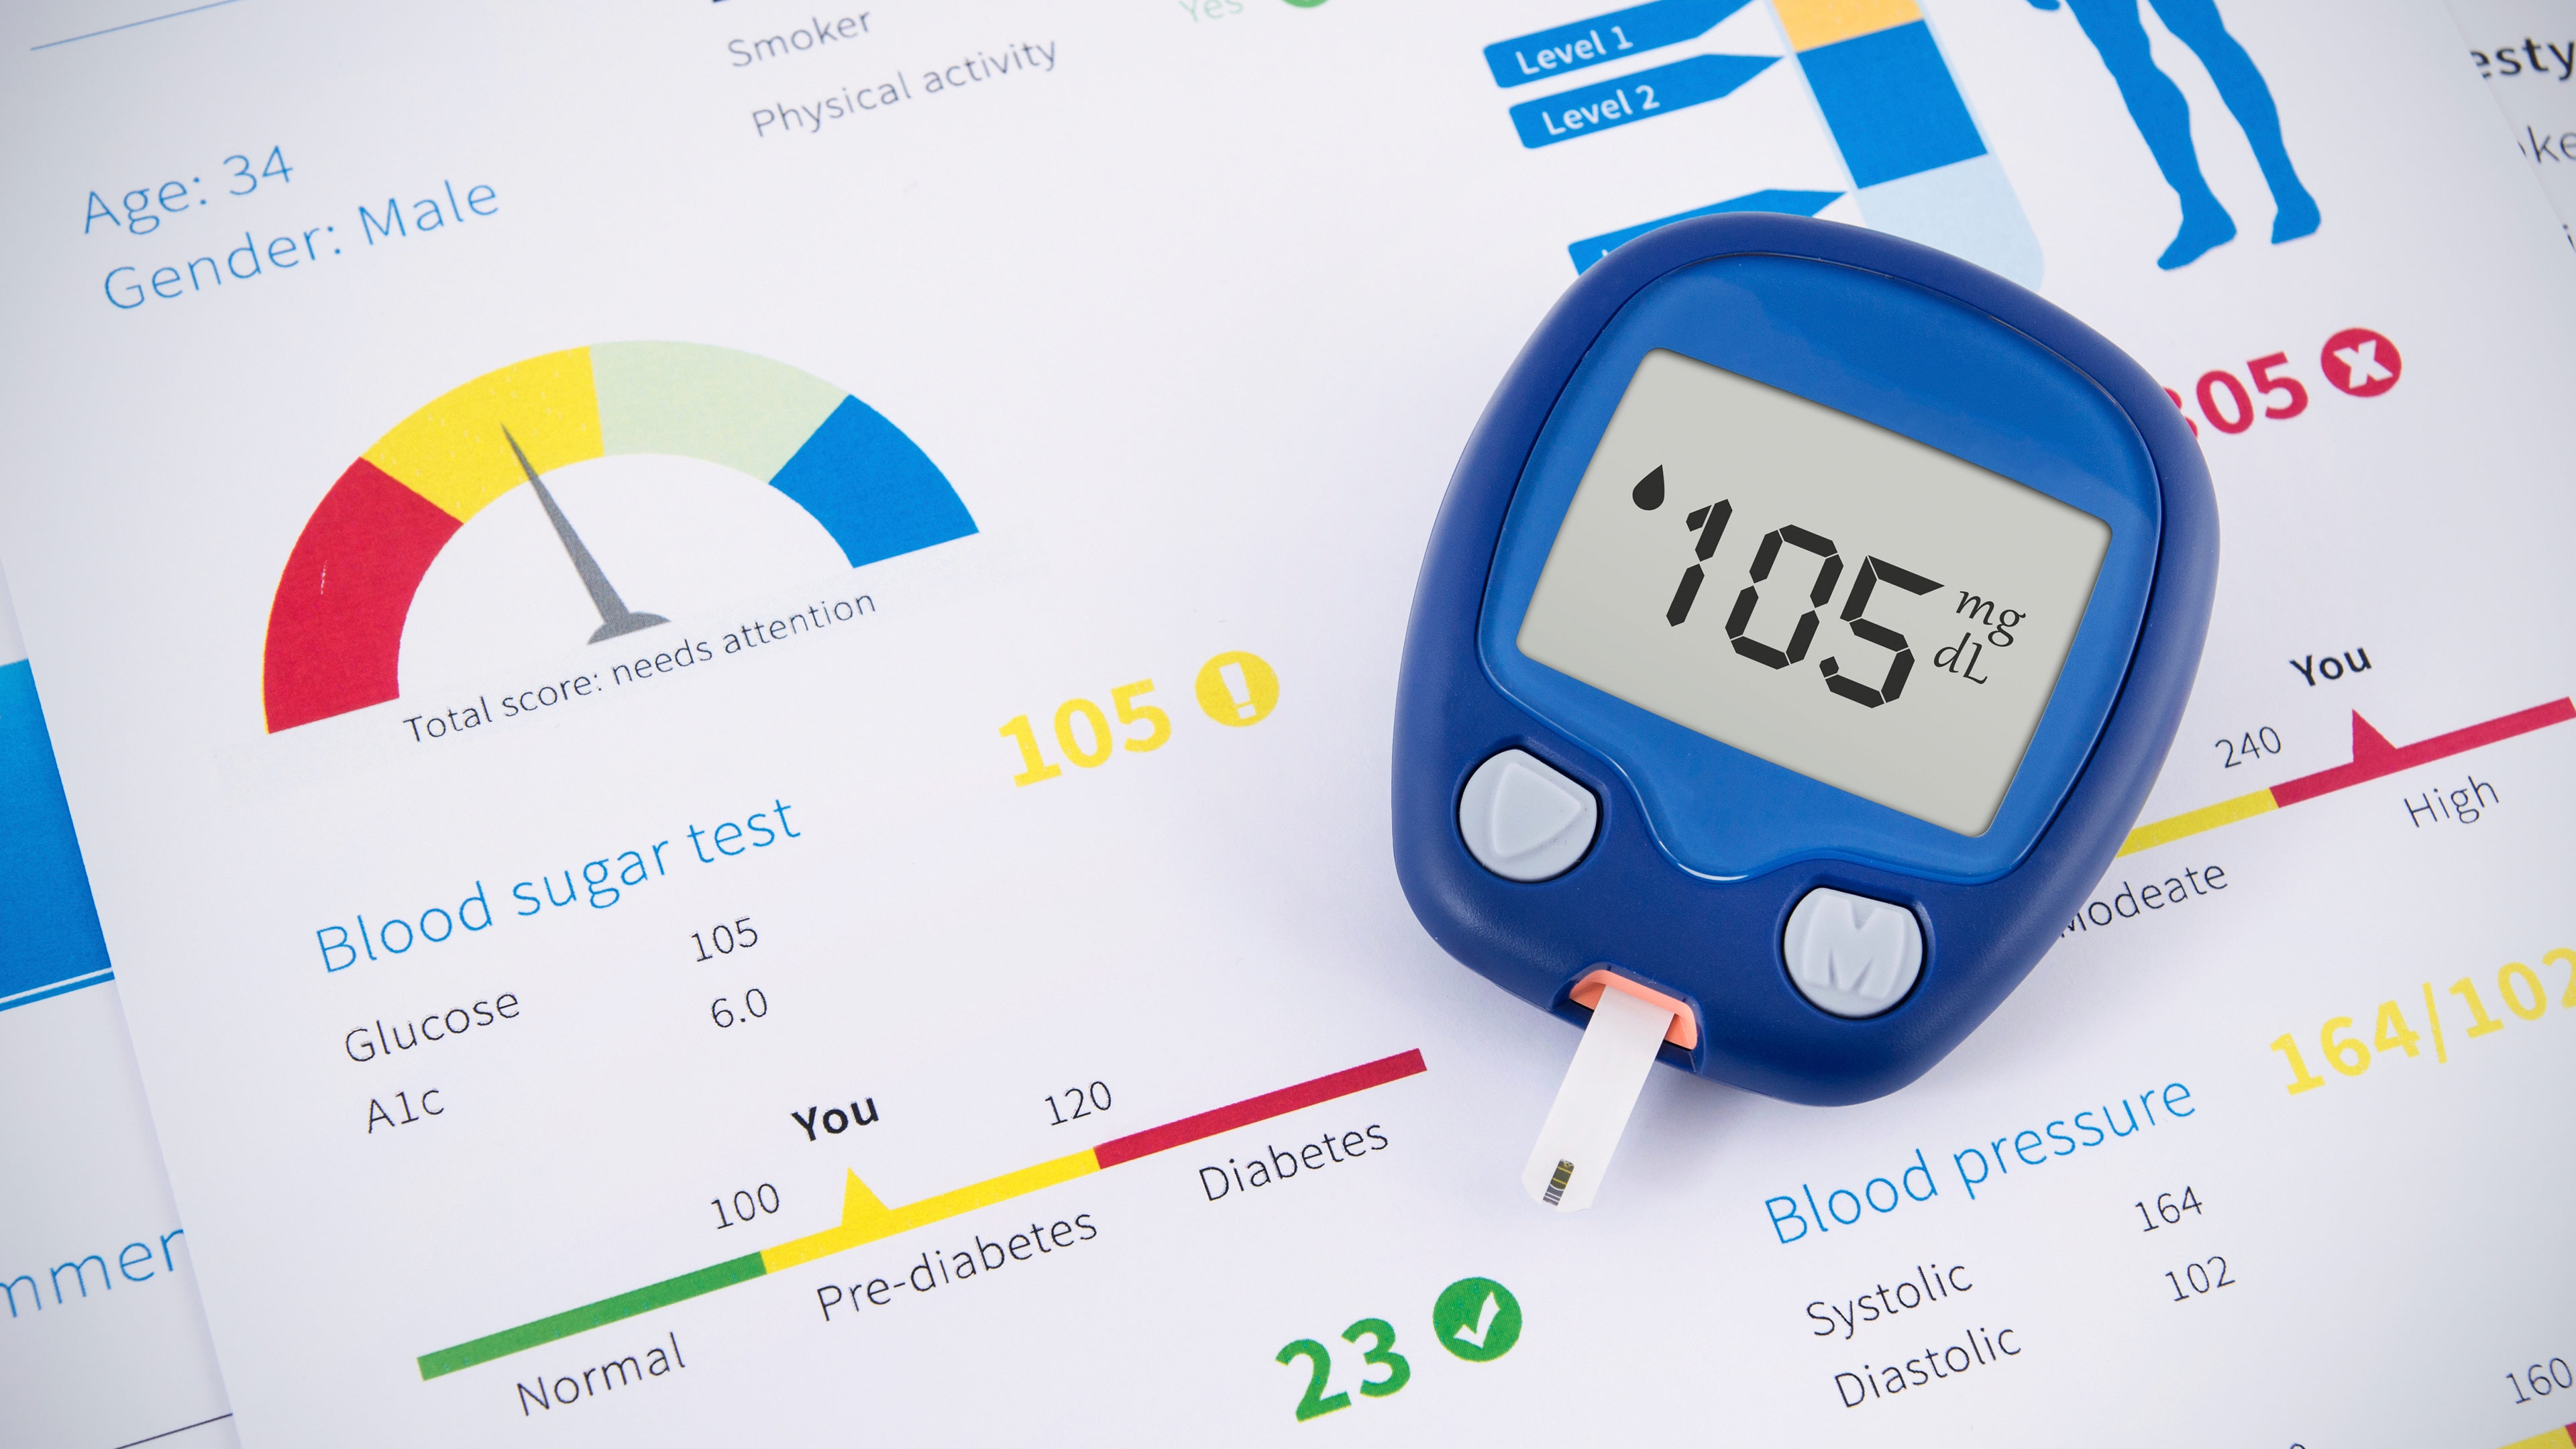 Pre-Diabetes, Metabolic Syndrome, Impaired Fasting Glucose, Insulin